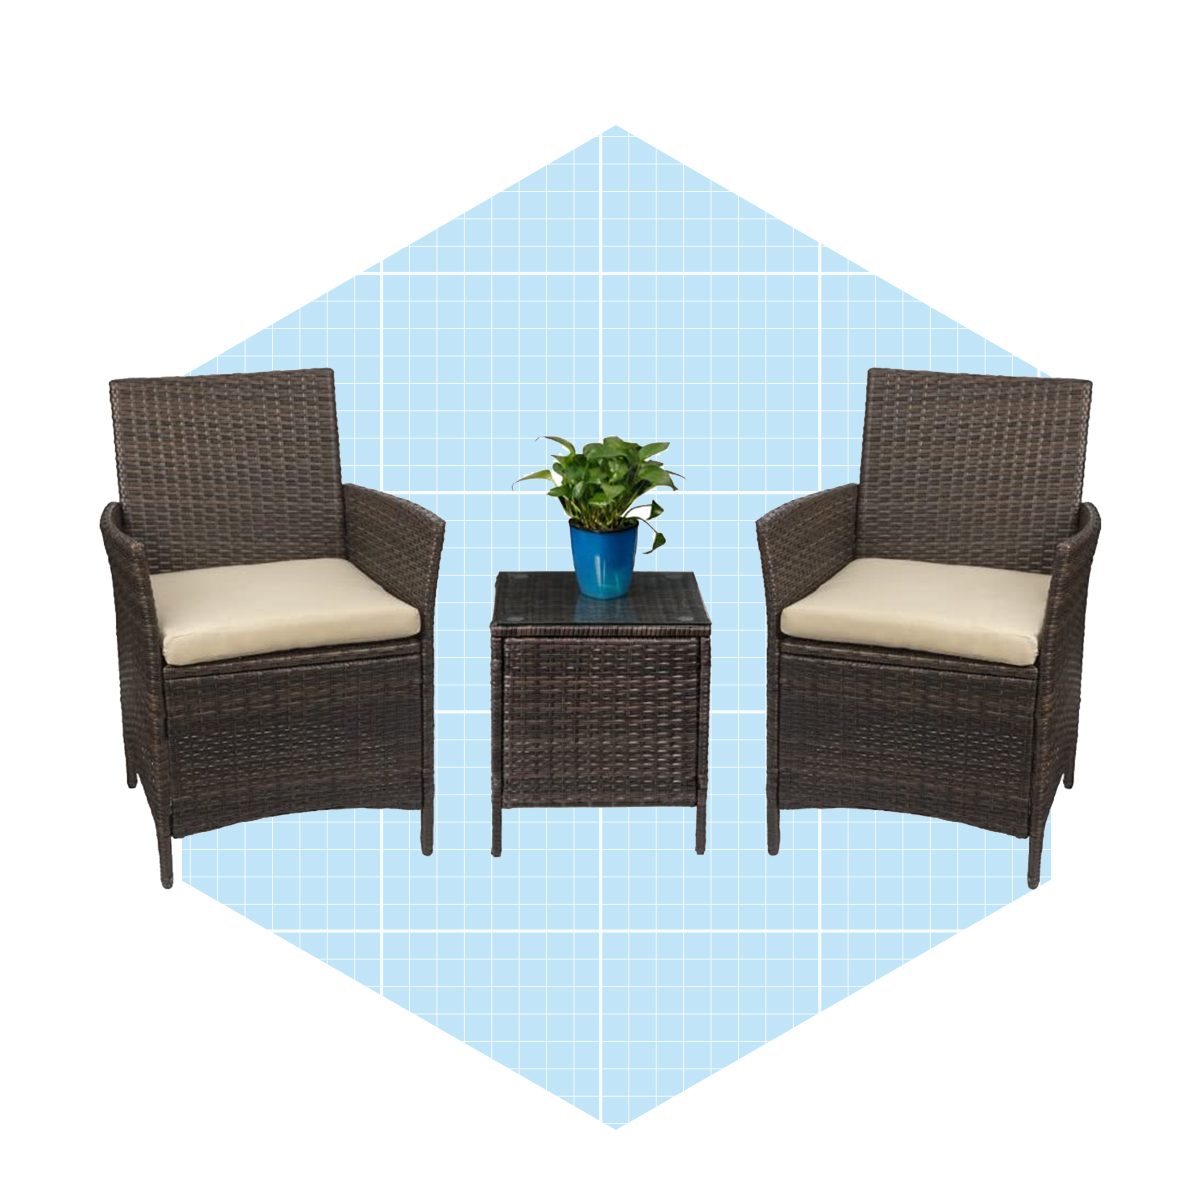 5 Best Wicker Patio Furniture Pieces for Outdoor Cozy Cottage Vibes